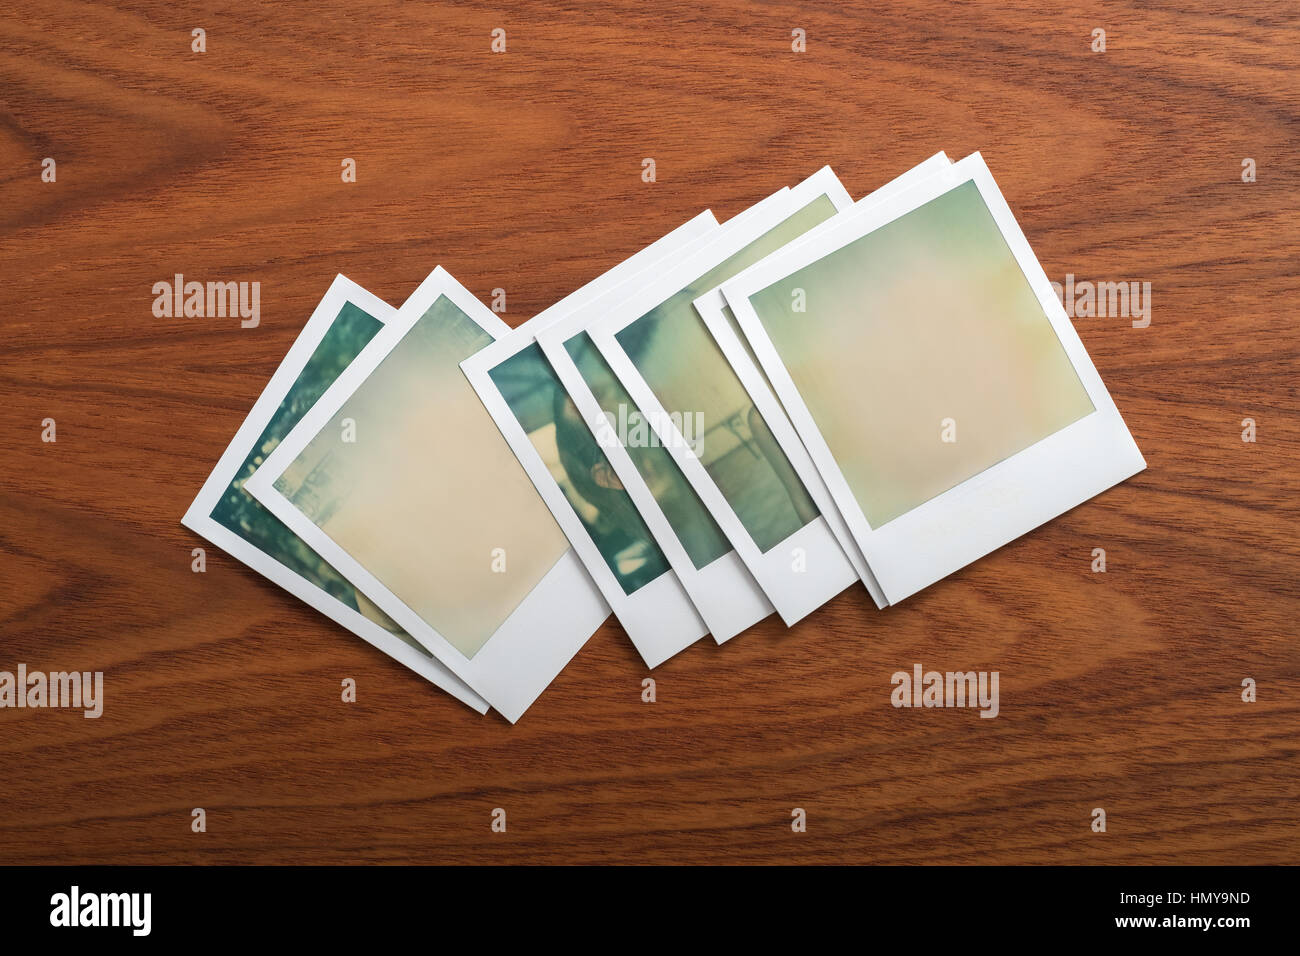 Blank instant print photographs on wooden table. Stock Photo